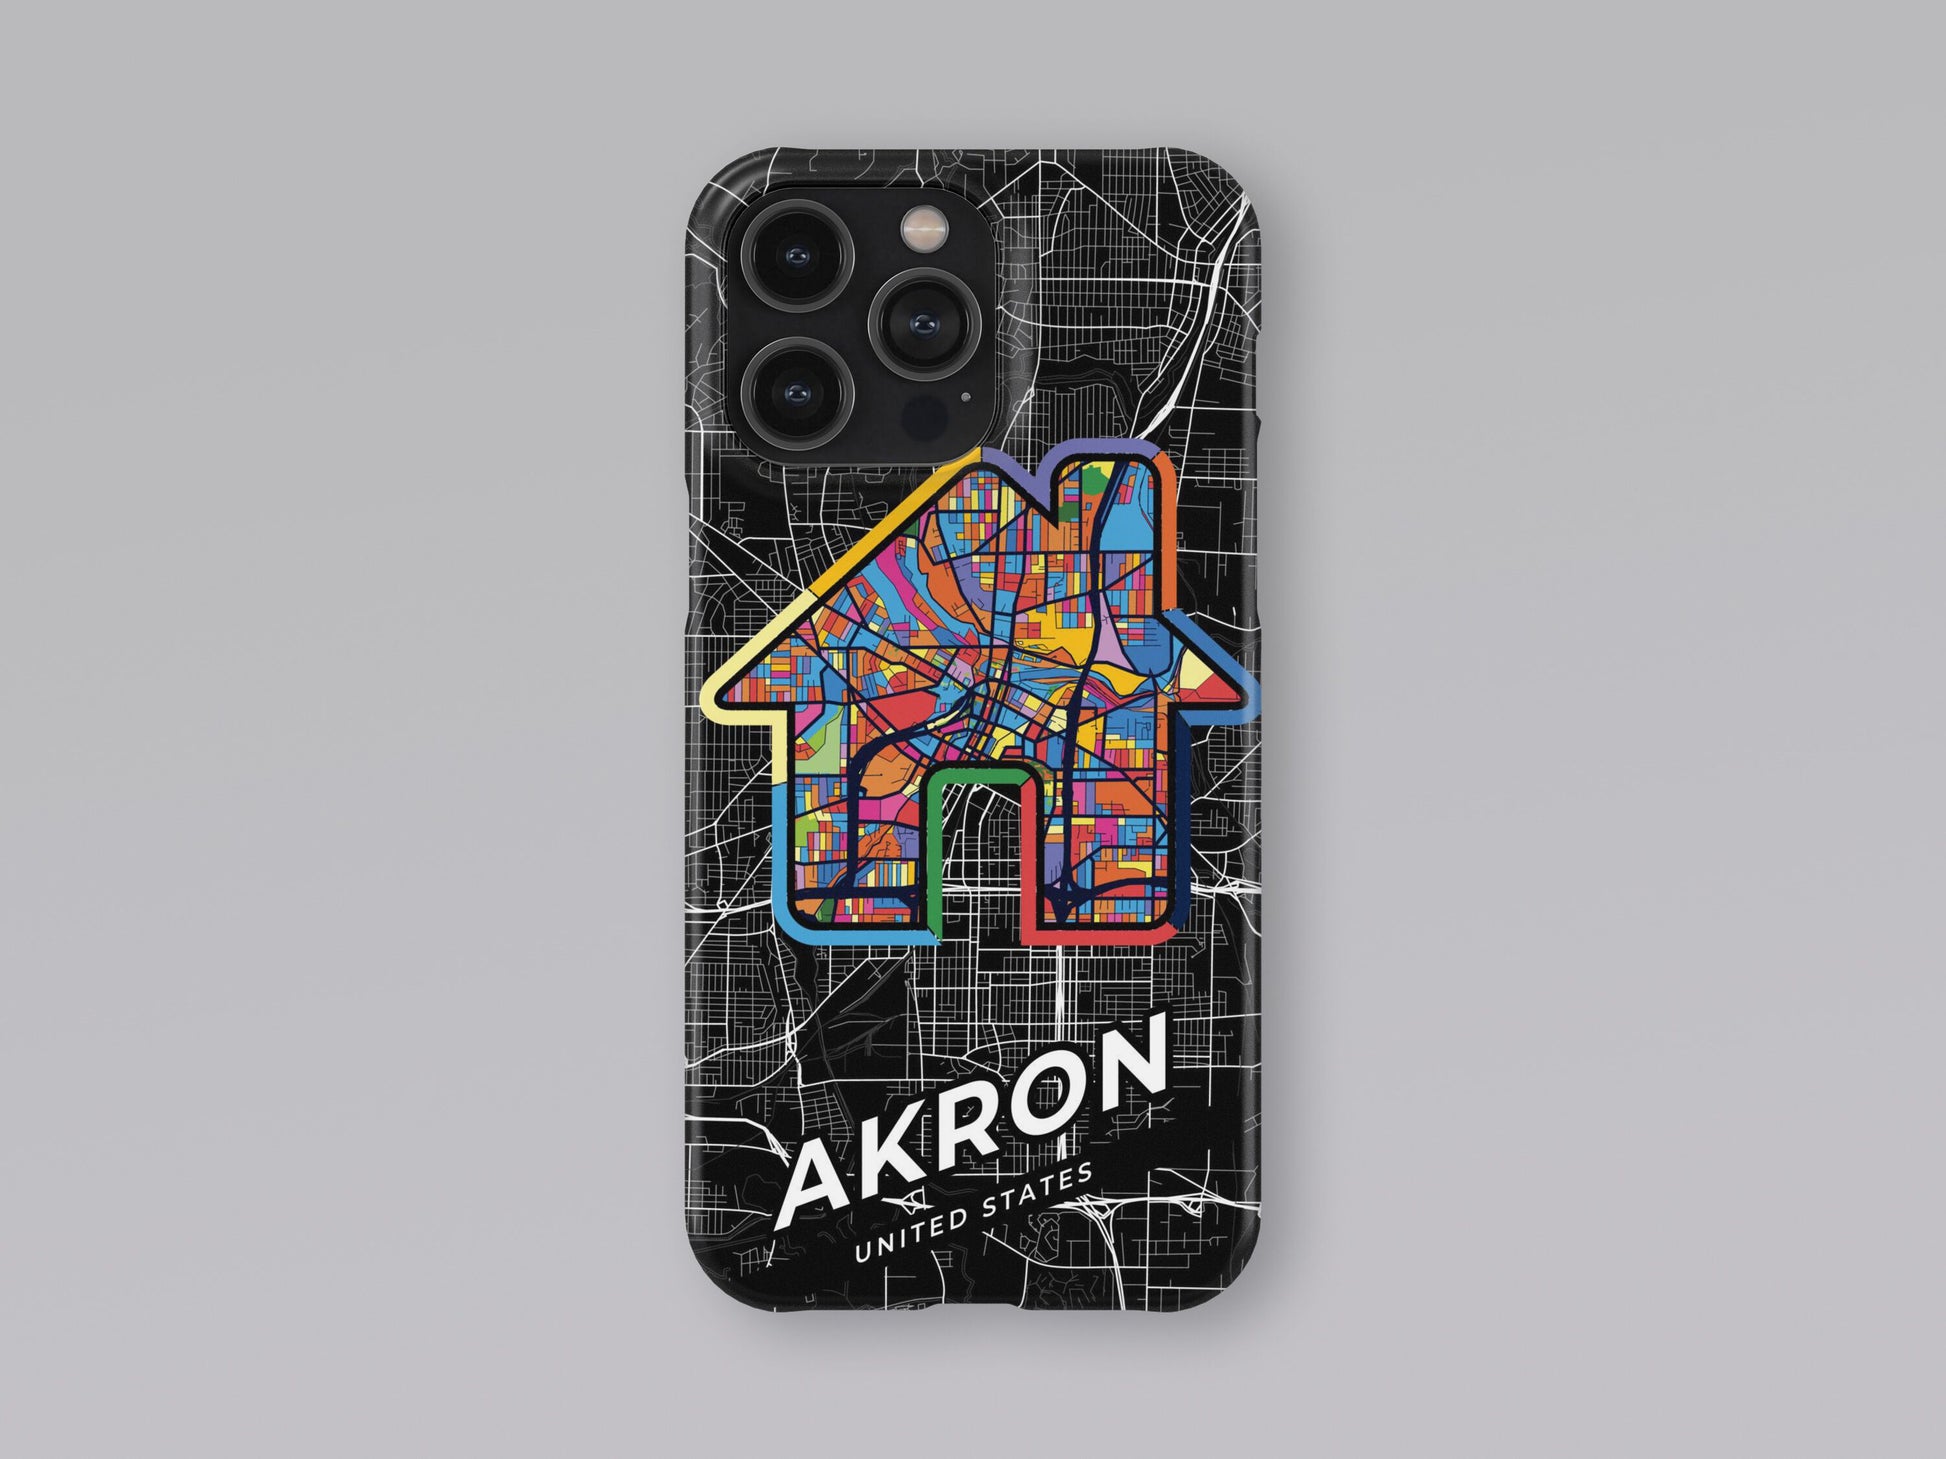 Akron Ohio slim phone case with colorful icon. Birthday, wedding or housewarming gift. Couple match cases. 3